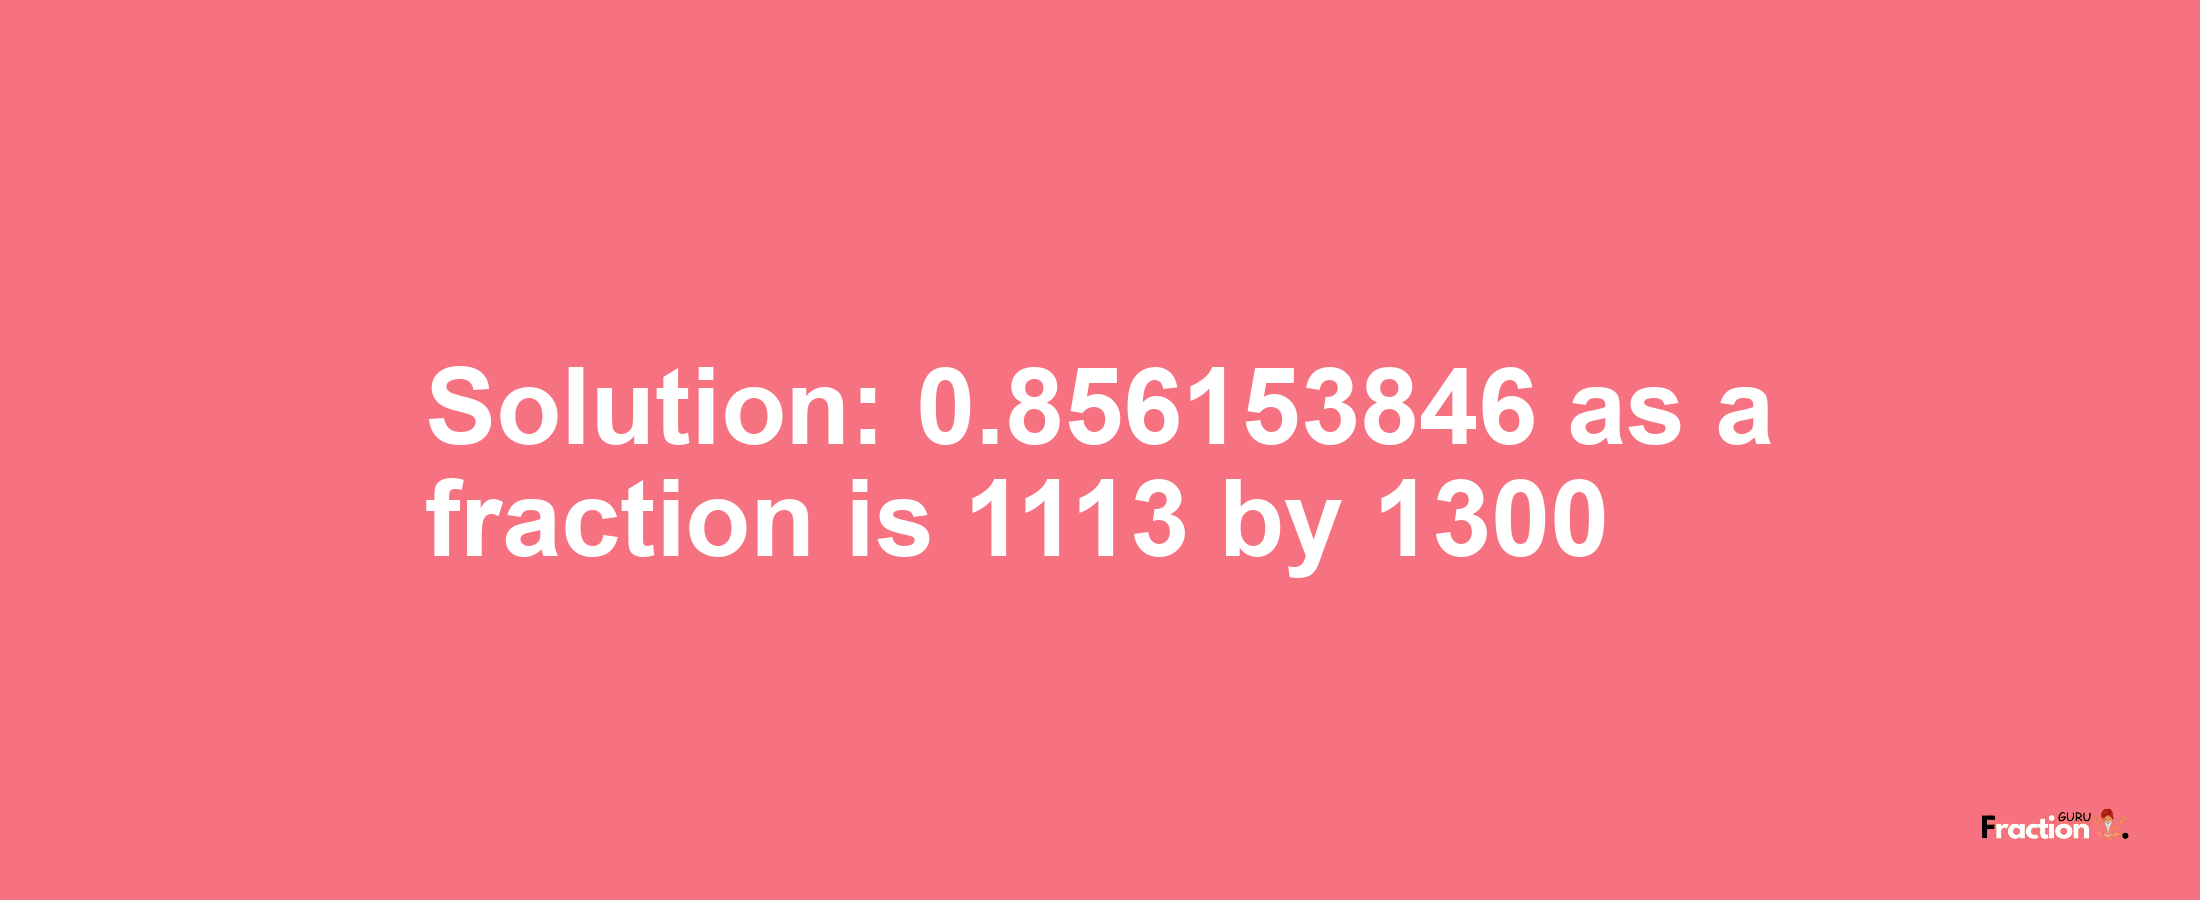 Solution:0.856153846 as a fraction is 1113/1300